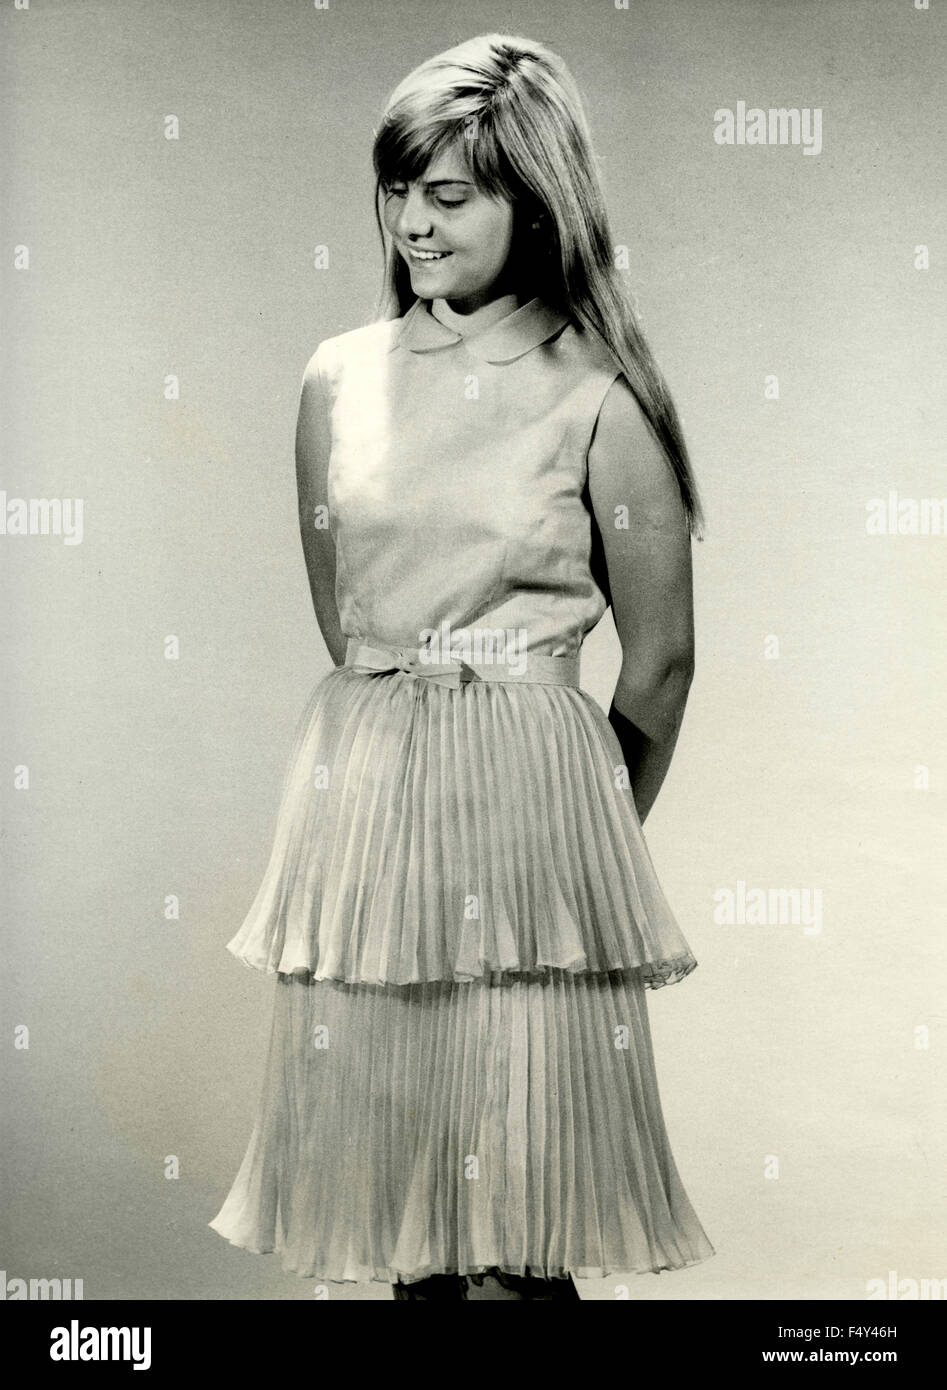 Fashion - 1960s. ;Spring chic! From all the elegant spring outfits